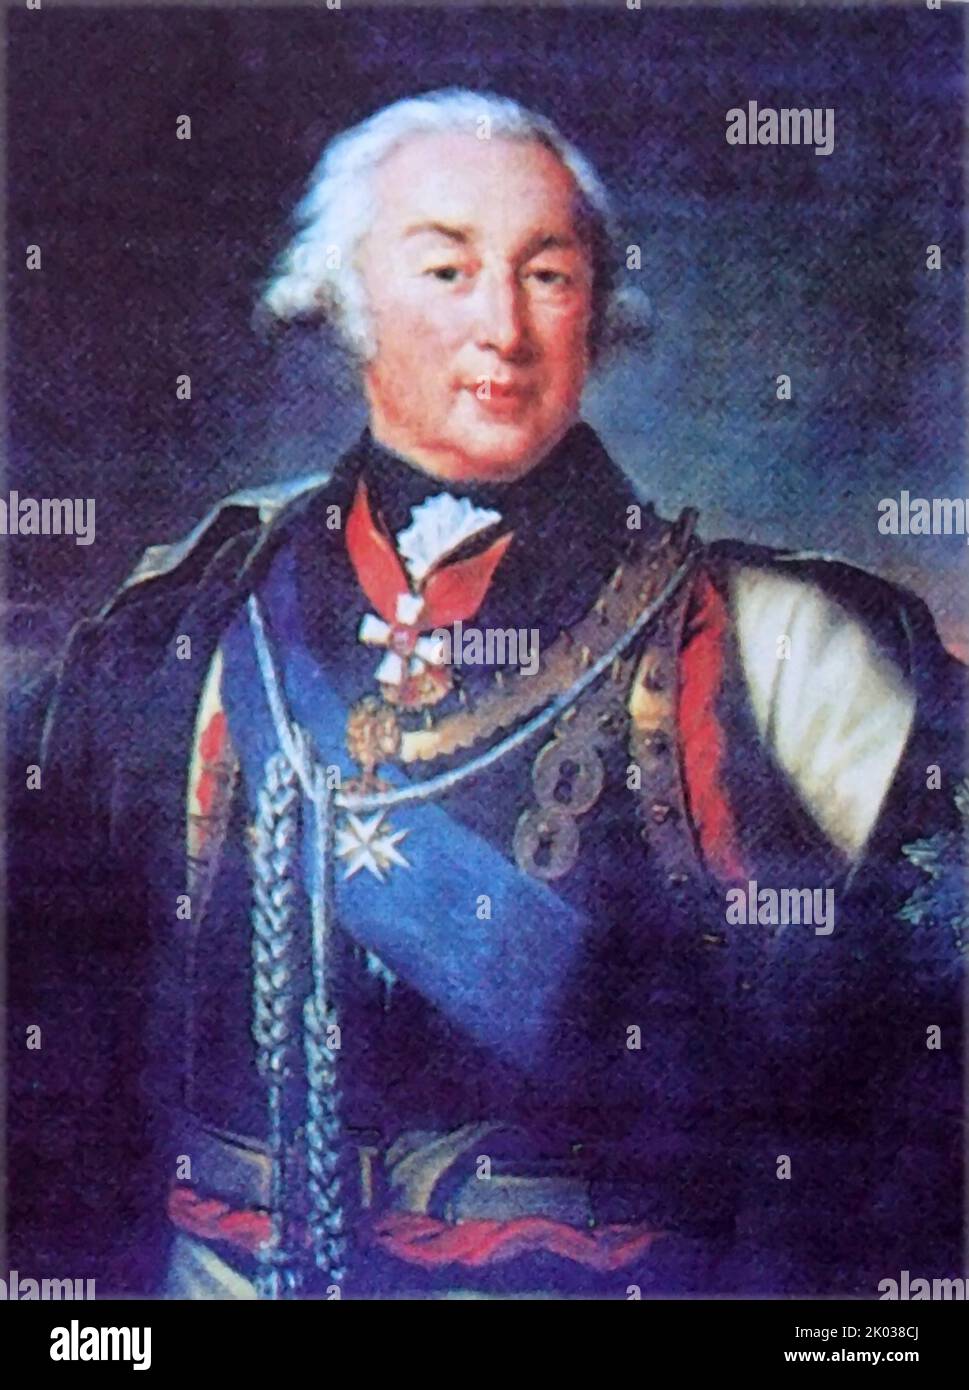 Count Ivan Petrovich Saltykov (1730 - 1805) Russian Field Marshal, the Governor-General of Moscow from 1797 to 1804, and owner of the grand estate of Marfino. Stock Photo